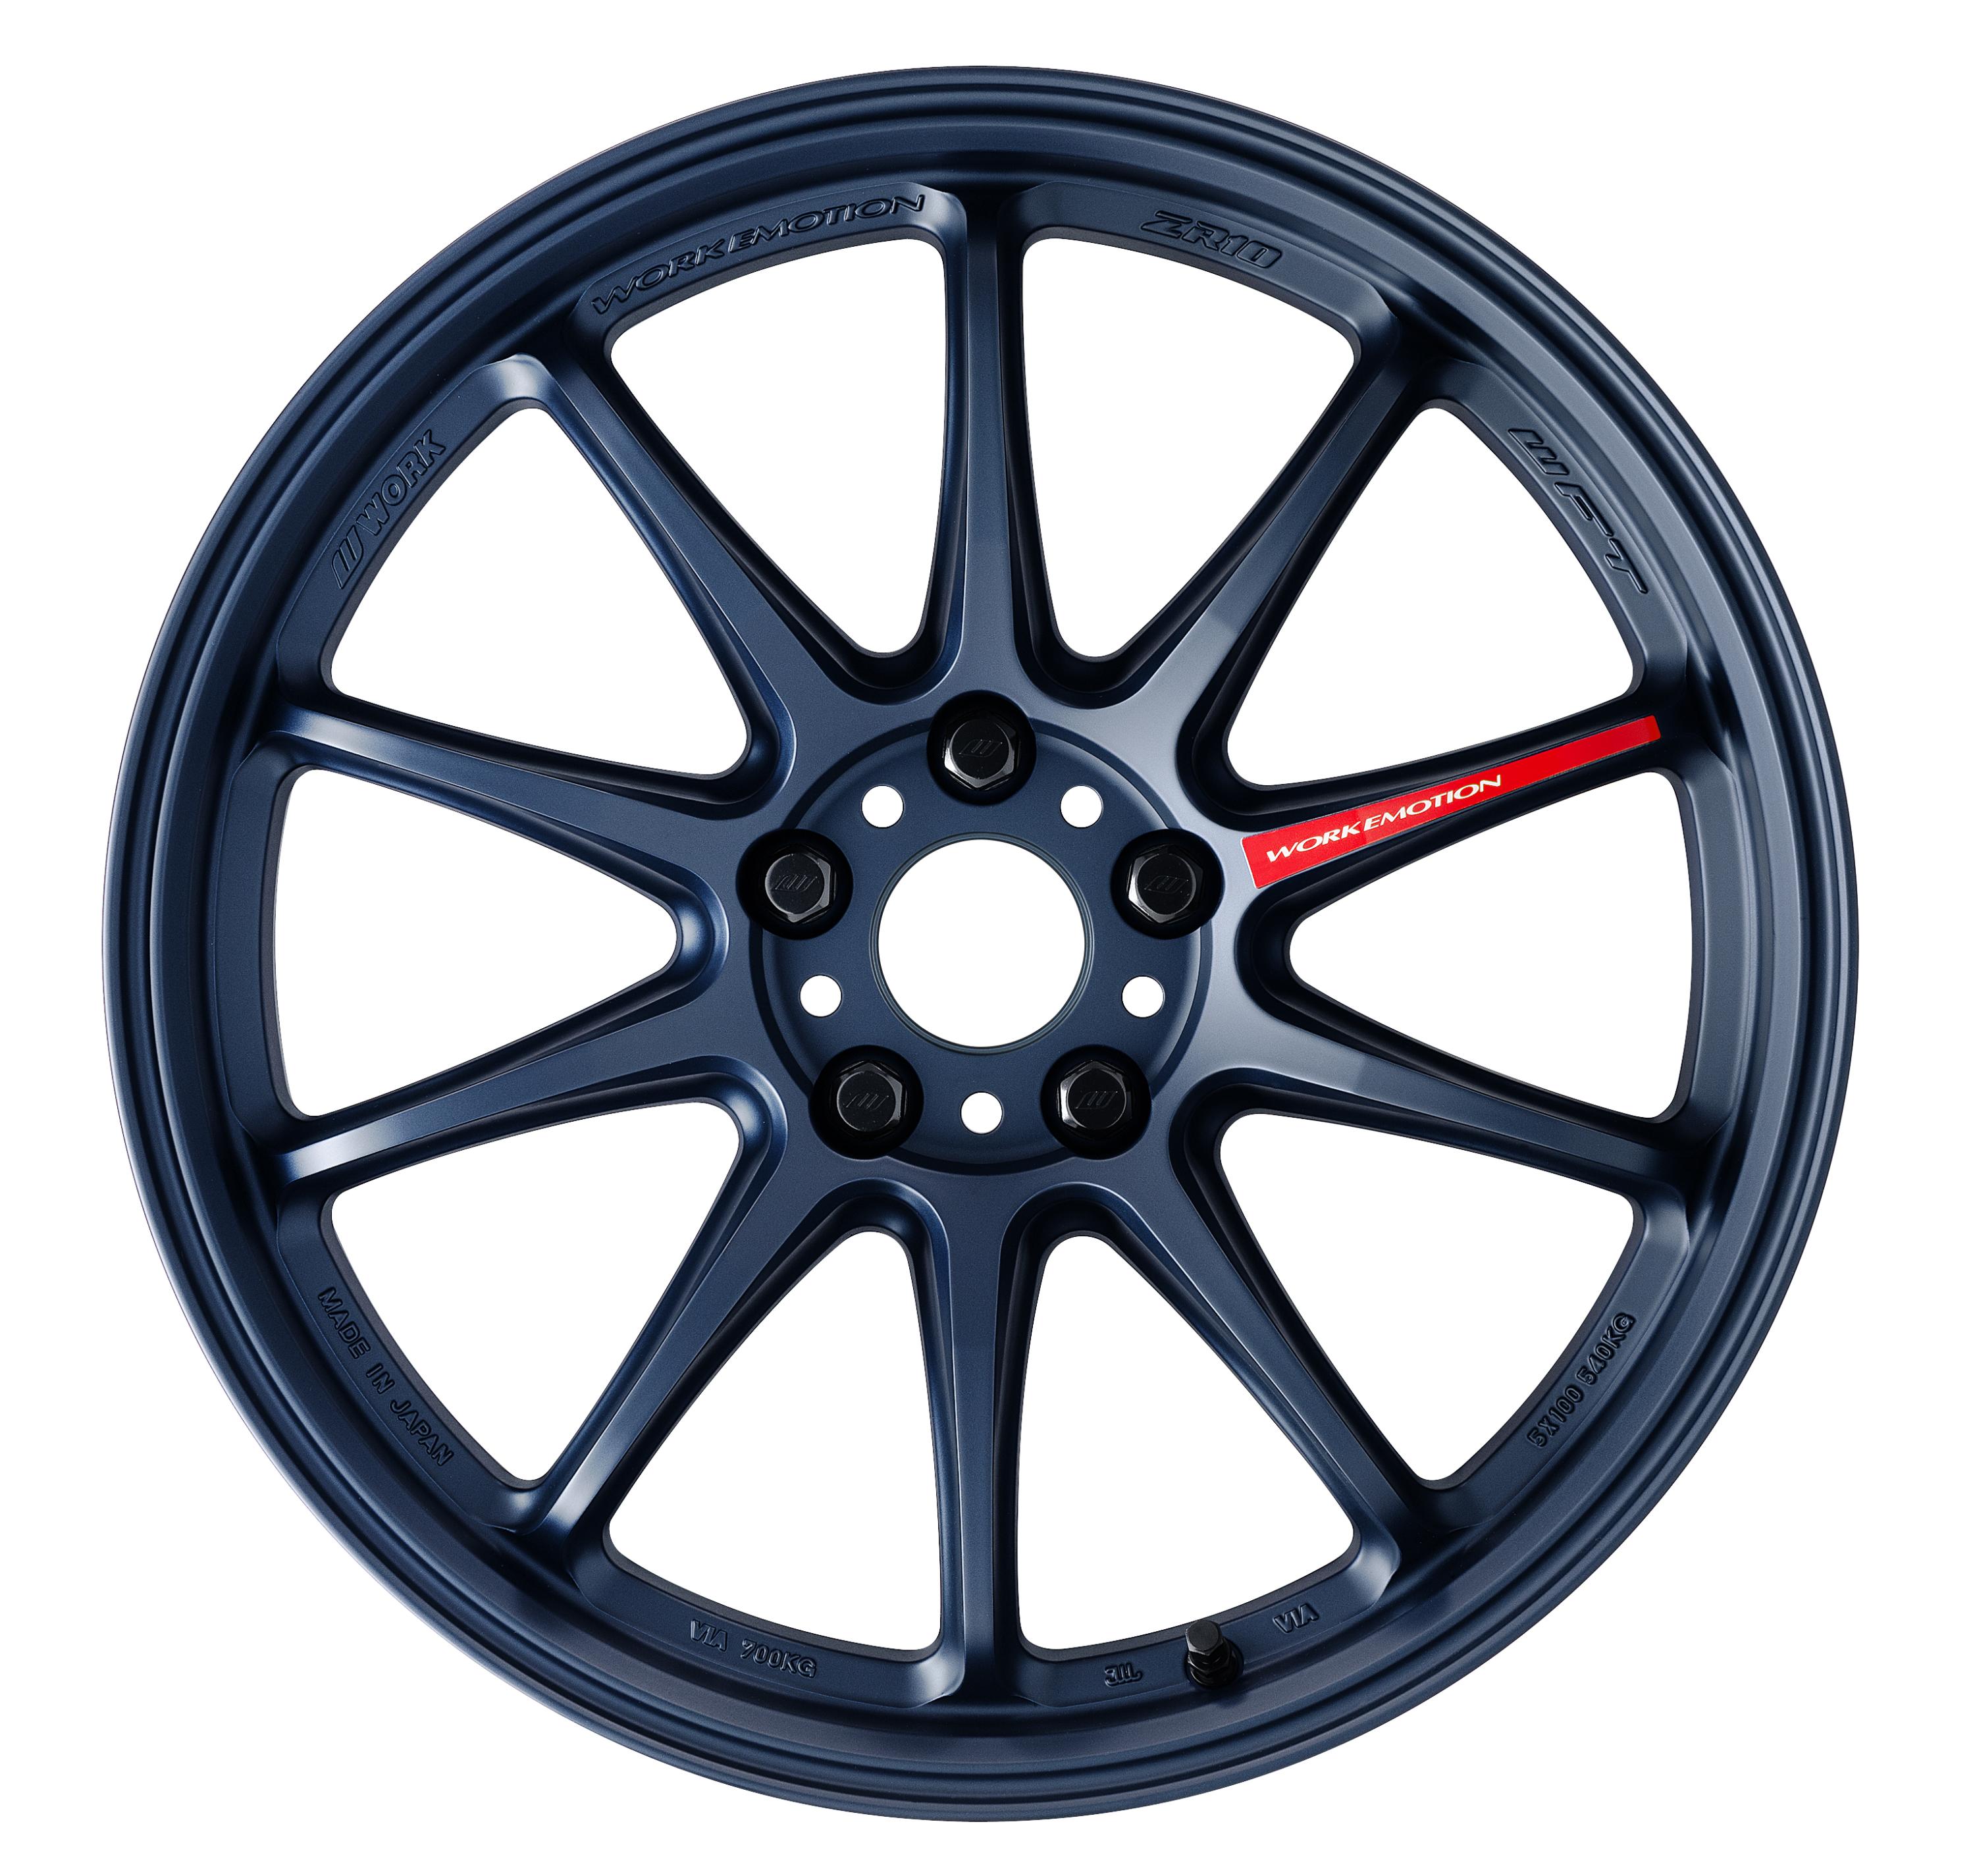 ■Size: 18inch
■disk: Deep taper (shape) / matte navy (standard)
■rim: NORMAL (shape)
■Sports decal: red (included as standard)